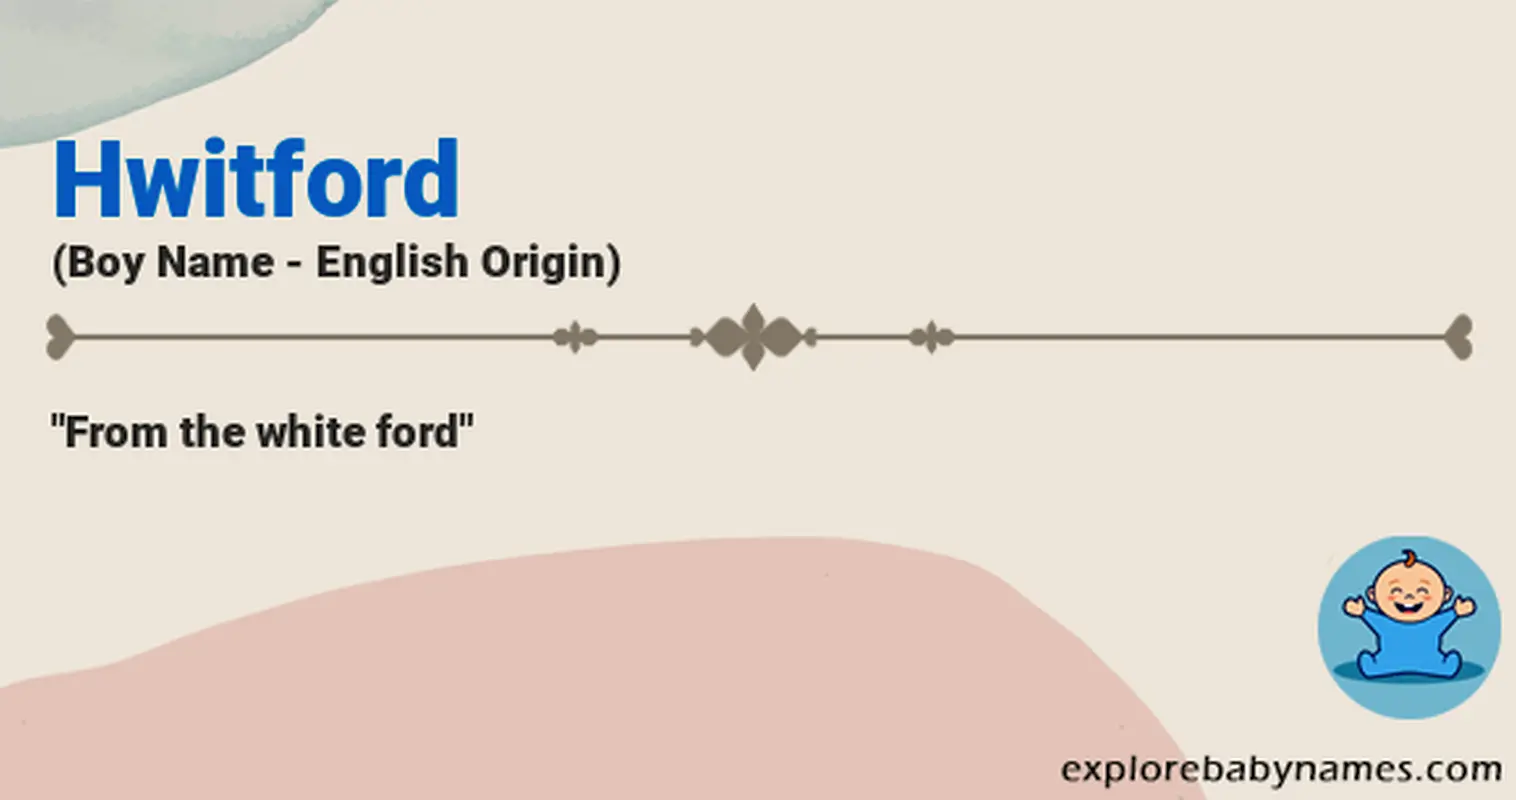 Meaning of Hwitford